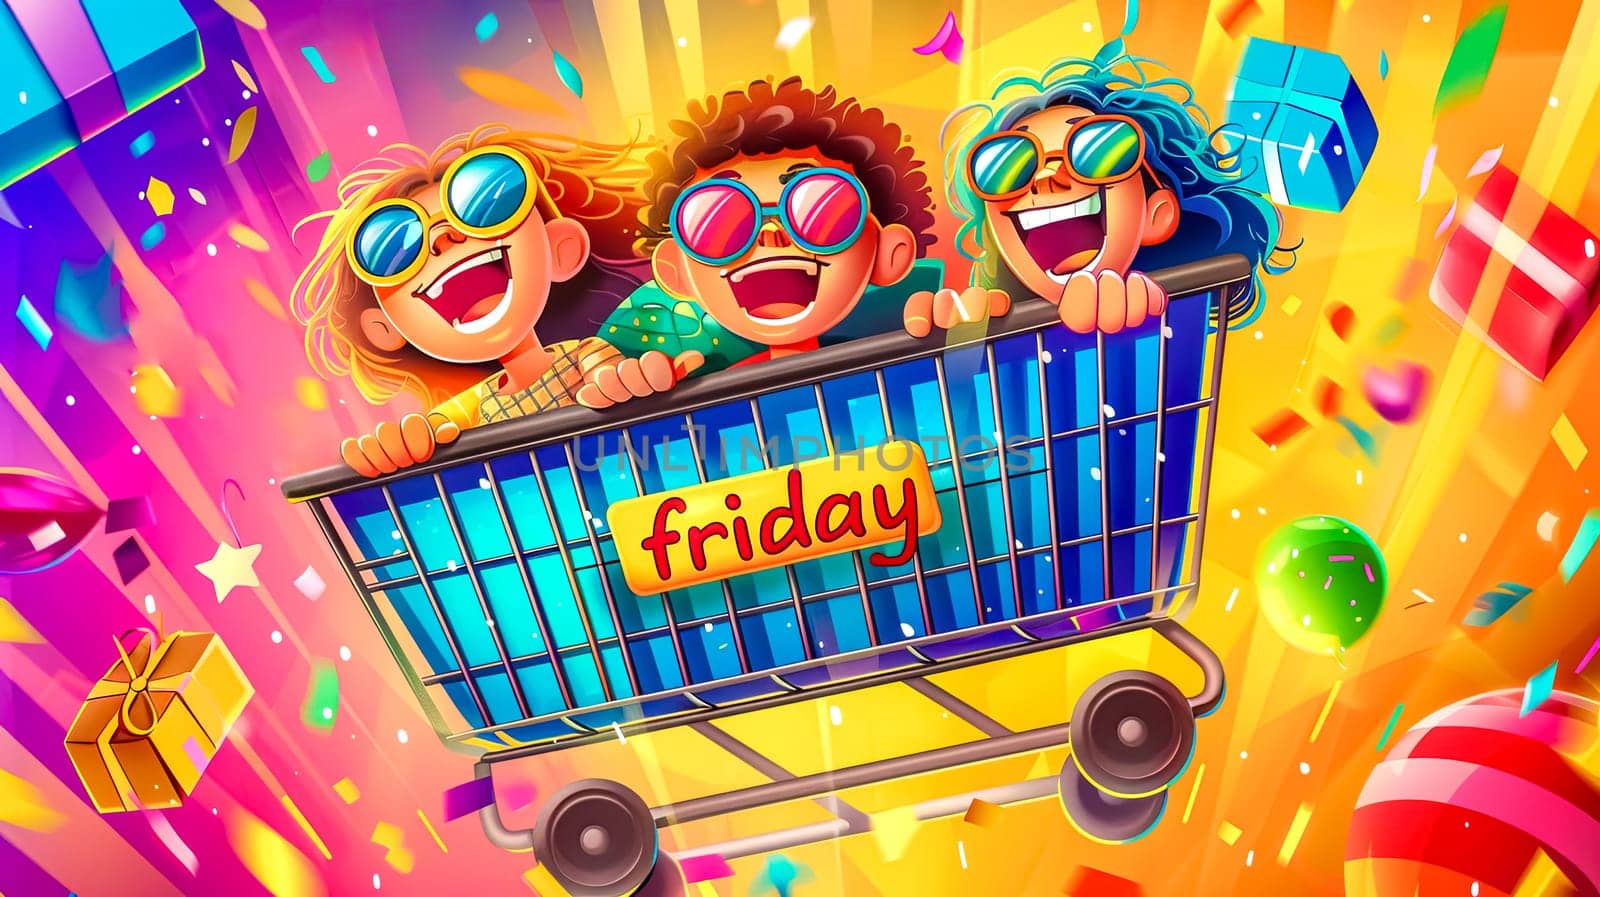 Animated children celebrate with a vibrant shopping cart ride, spreading weekend cheer by Edophoto